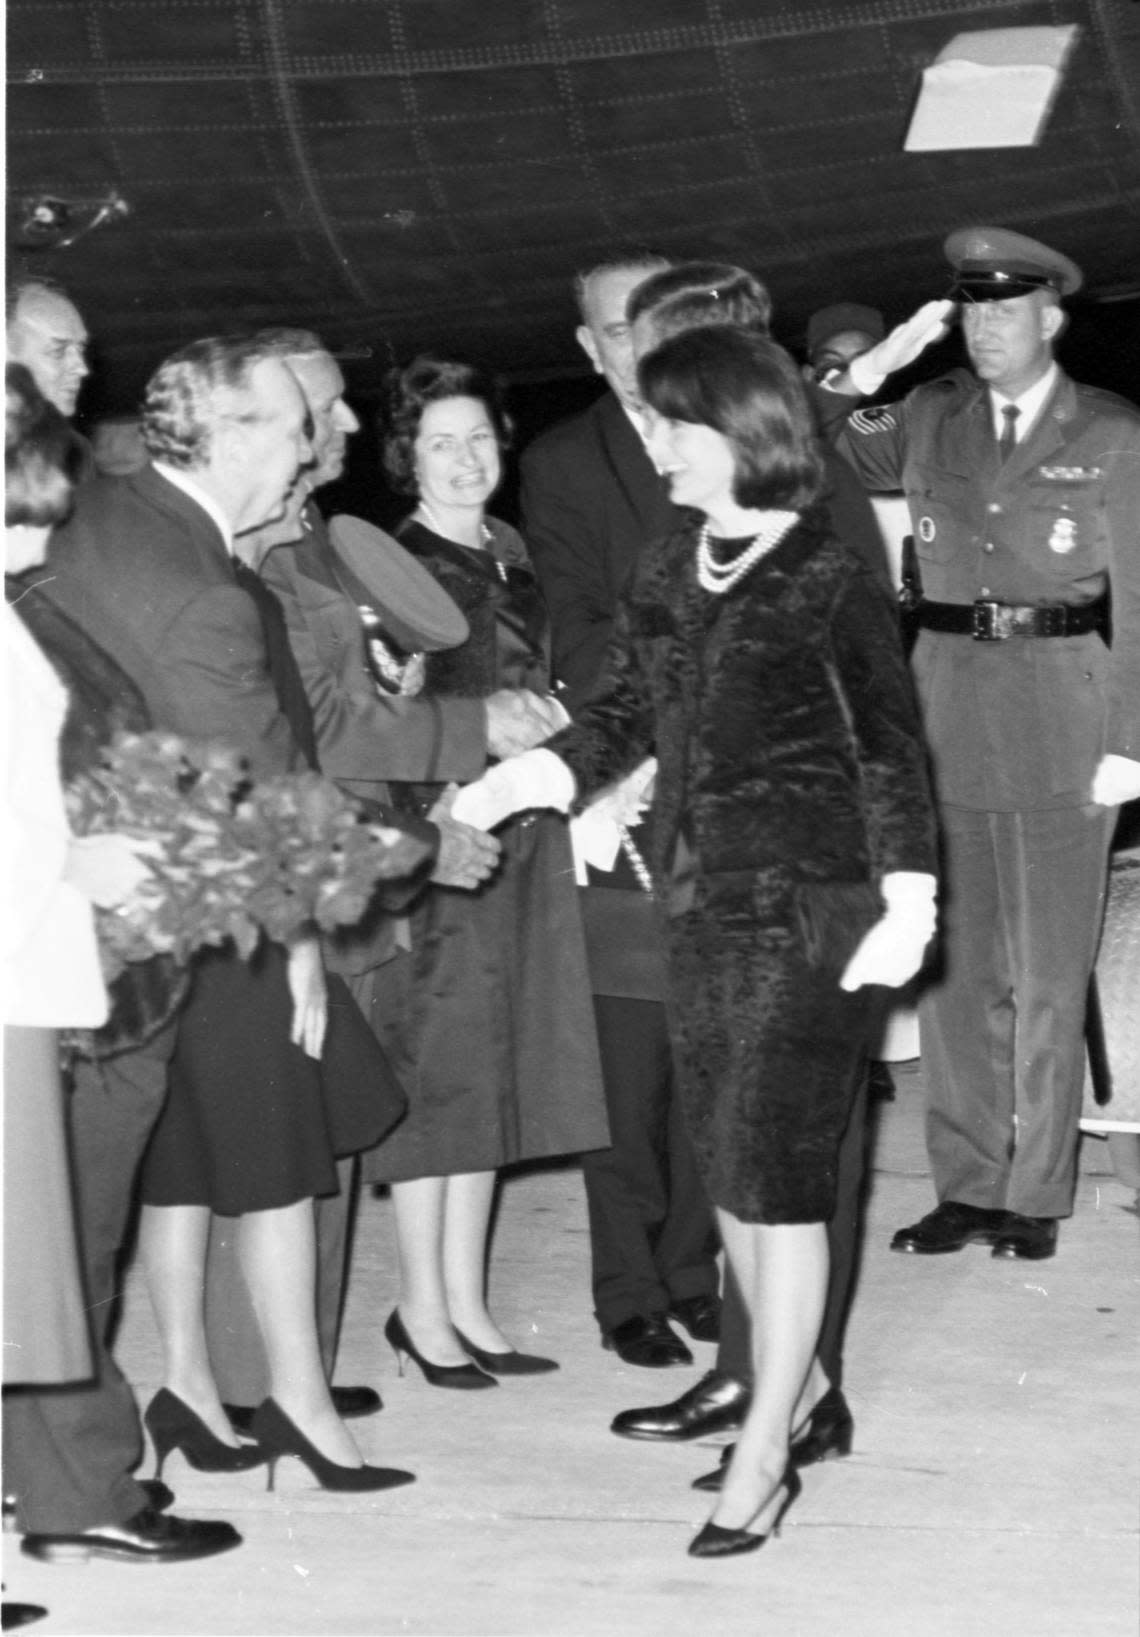 President John F. Kennedy and first lady Jackie Kennedy greet well-wishers along the reception line after Air Force One landed at Carswell Air Force Base, Fort Worth, on Nov. 21, 1963. Lady Bird and Vice President Lyndon Johnson are at the head of the line.